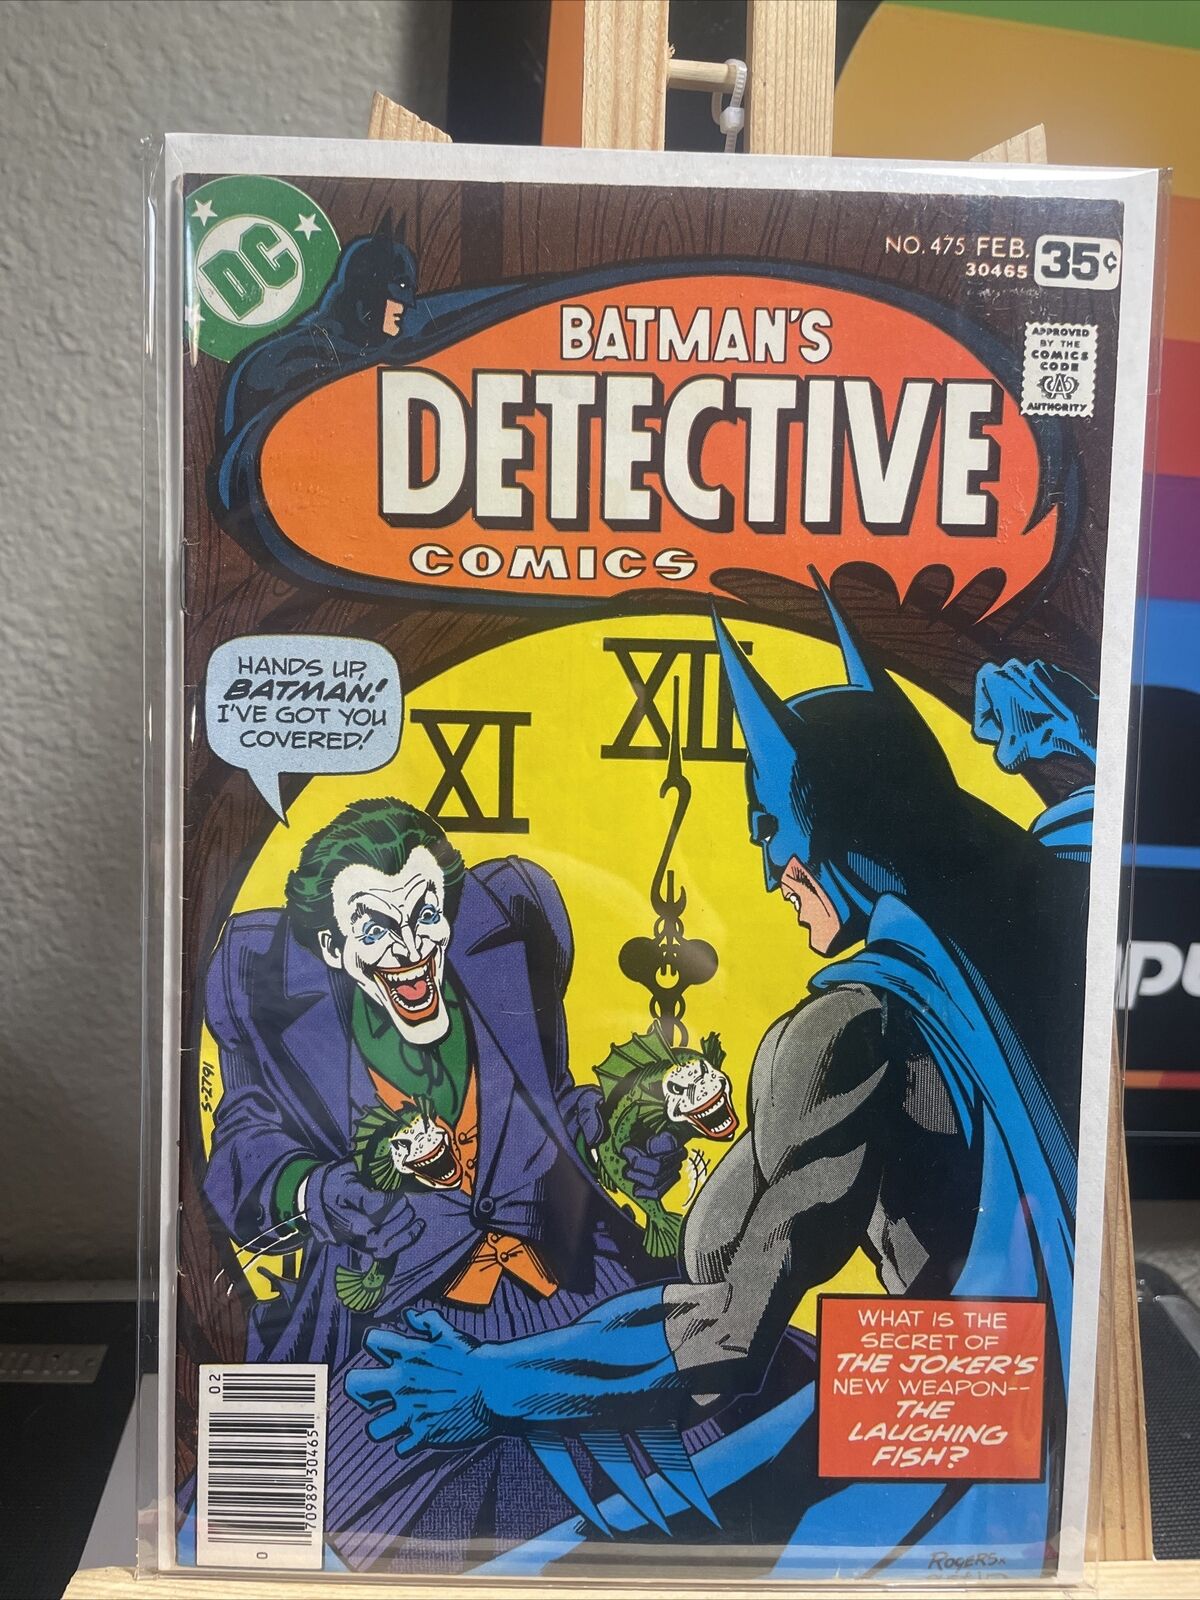 Detective Comics #475 (1978) Classic story titled “The Laughing Fish”.